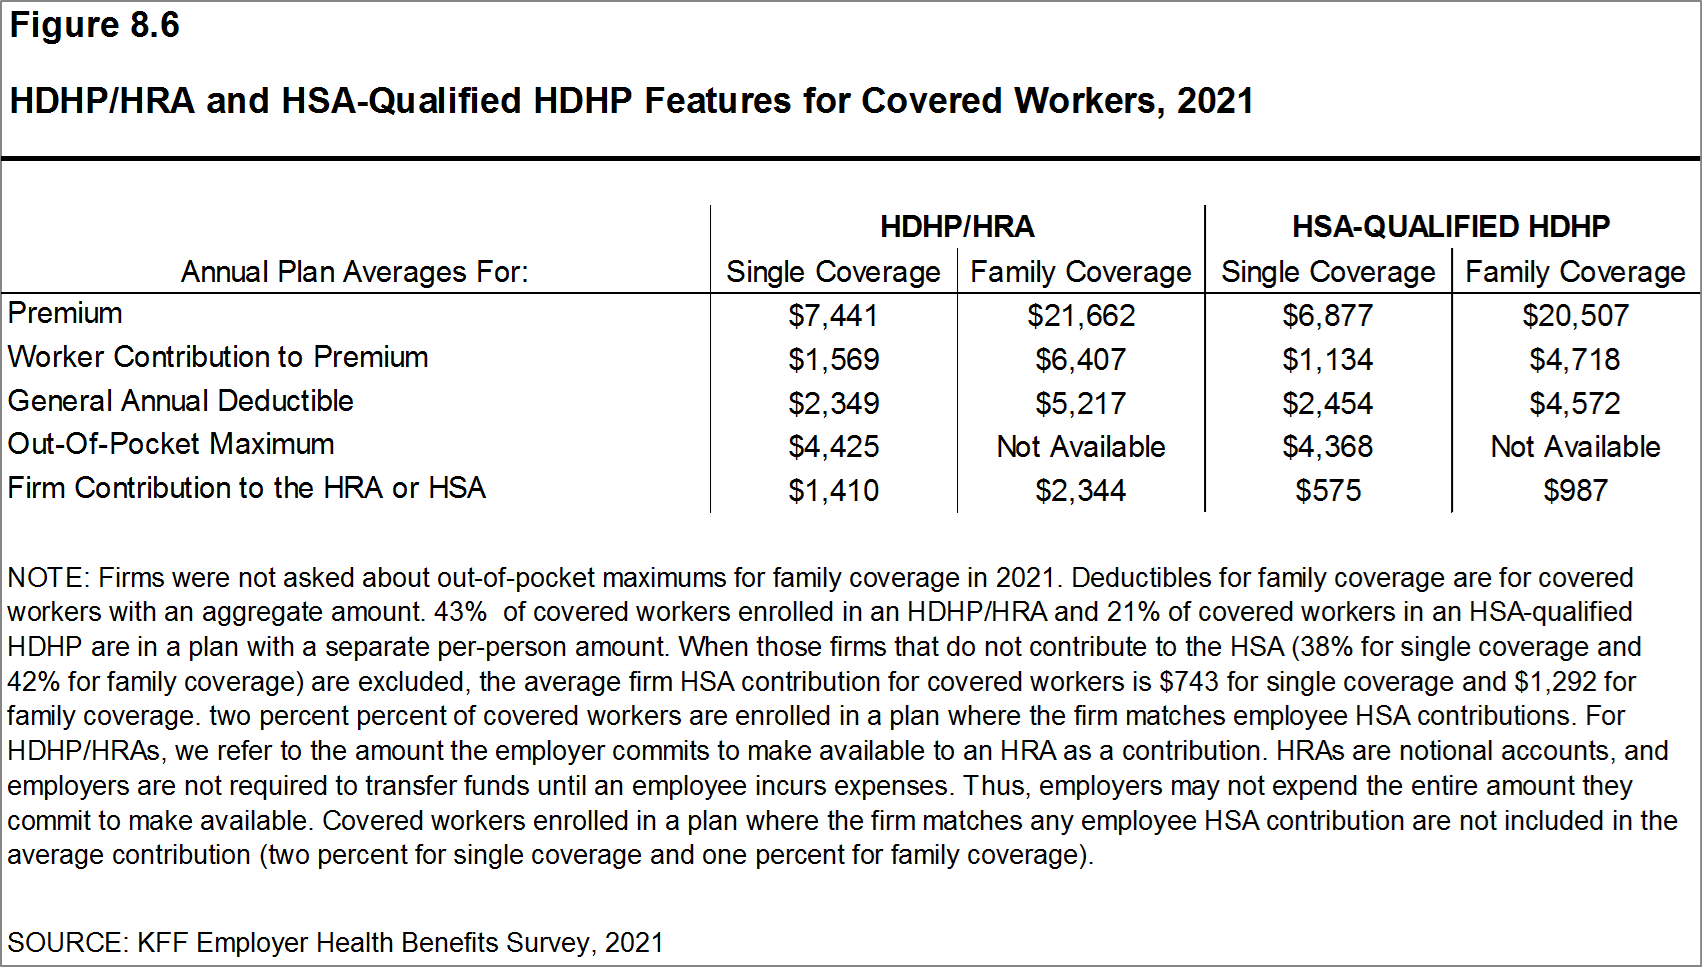 HDHP/HRA and HSAQualified HDHP Features for Covered Workers, 2021 9805